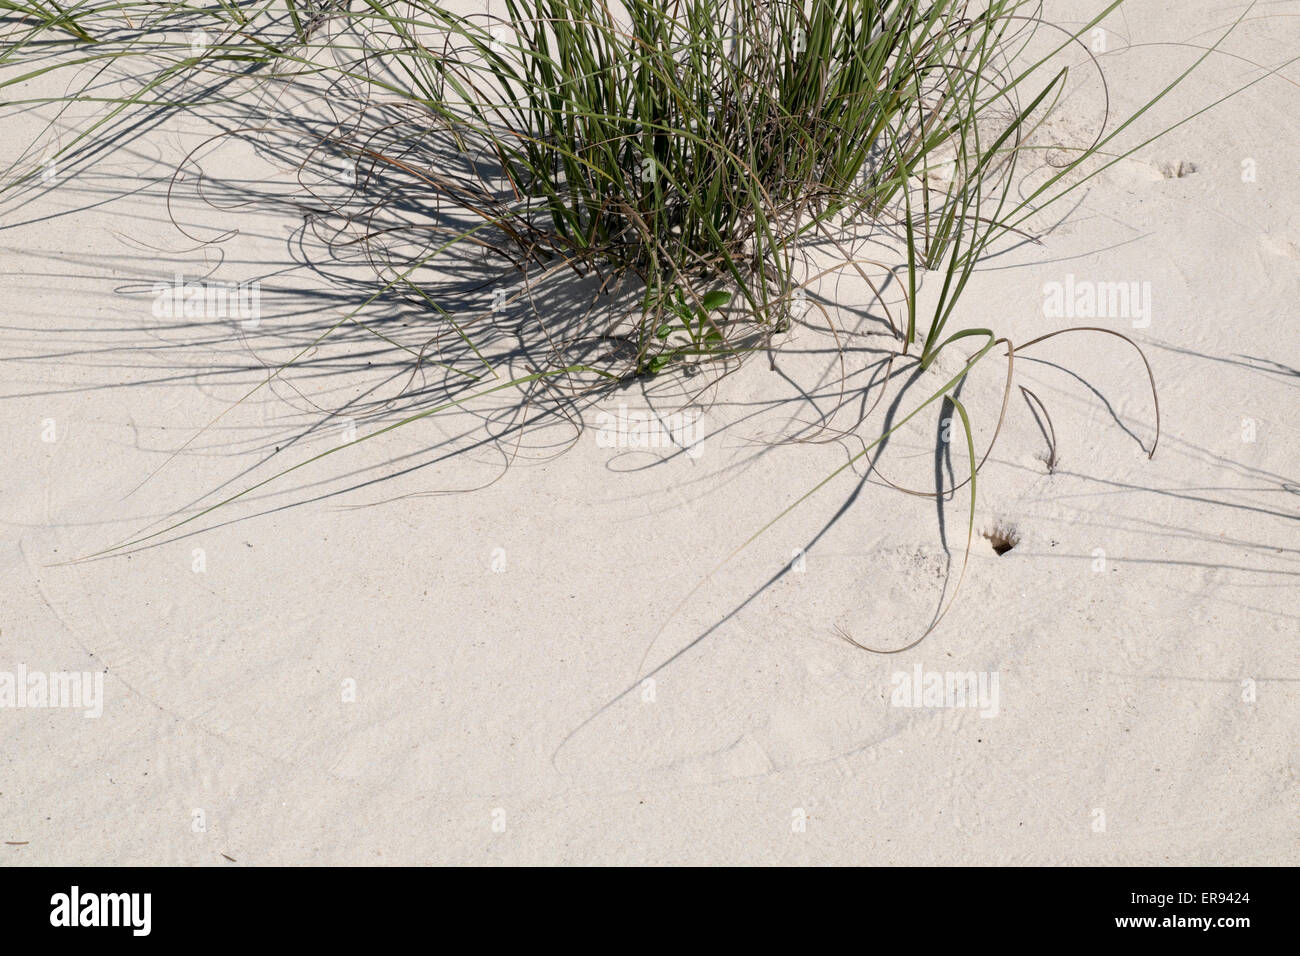 Dune grass and patterns in the sand. Stock Photo